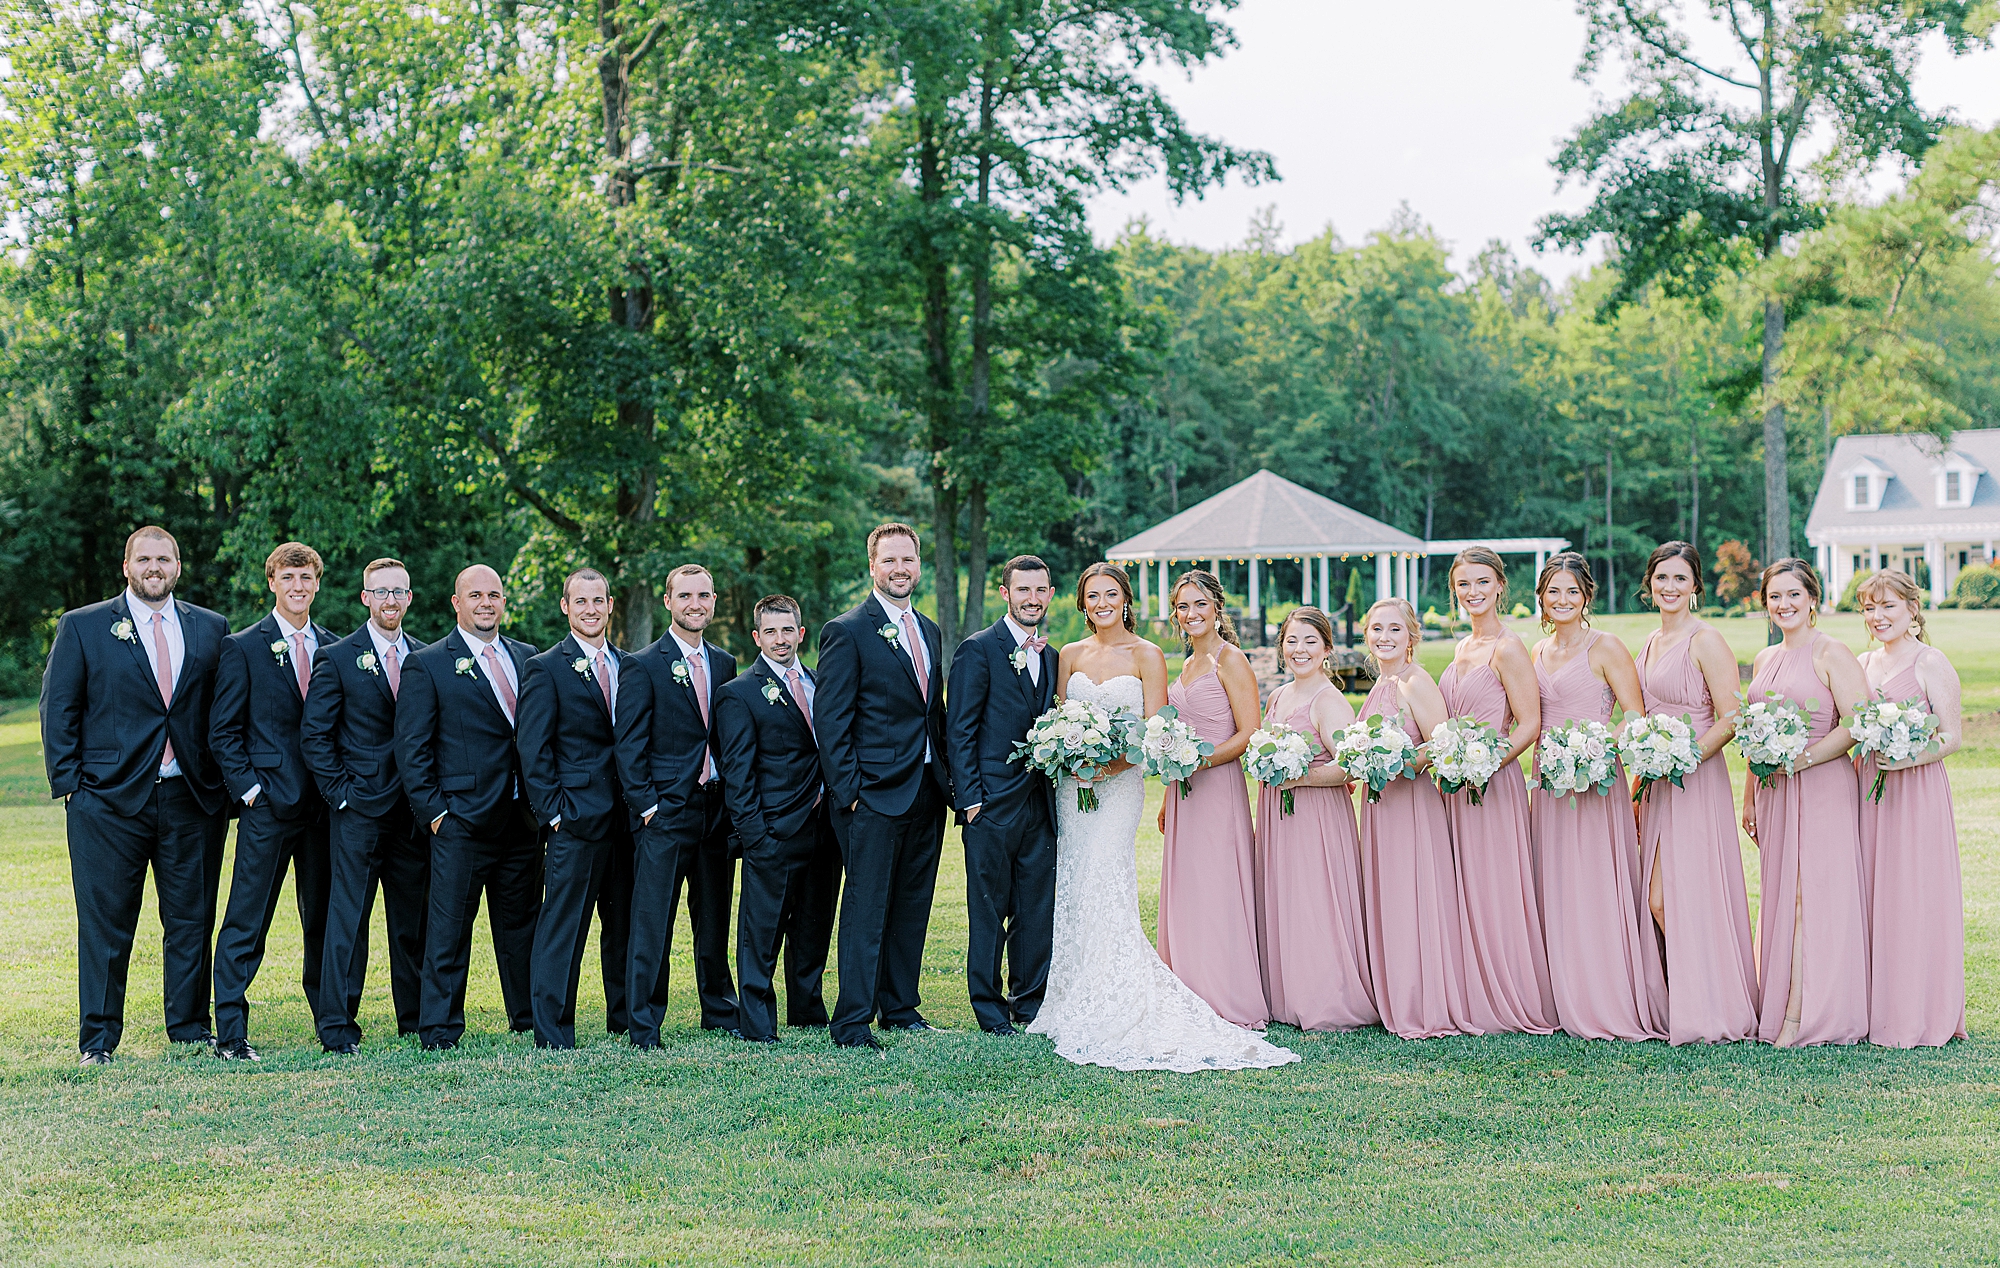 Group photo of bridesmaids wearing blush dresses and groomsmen in black suits.